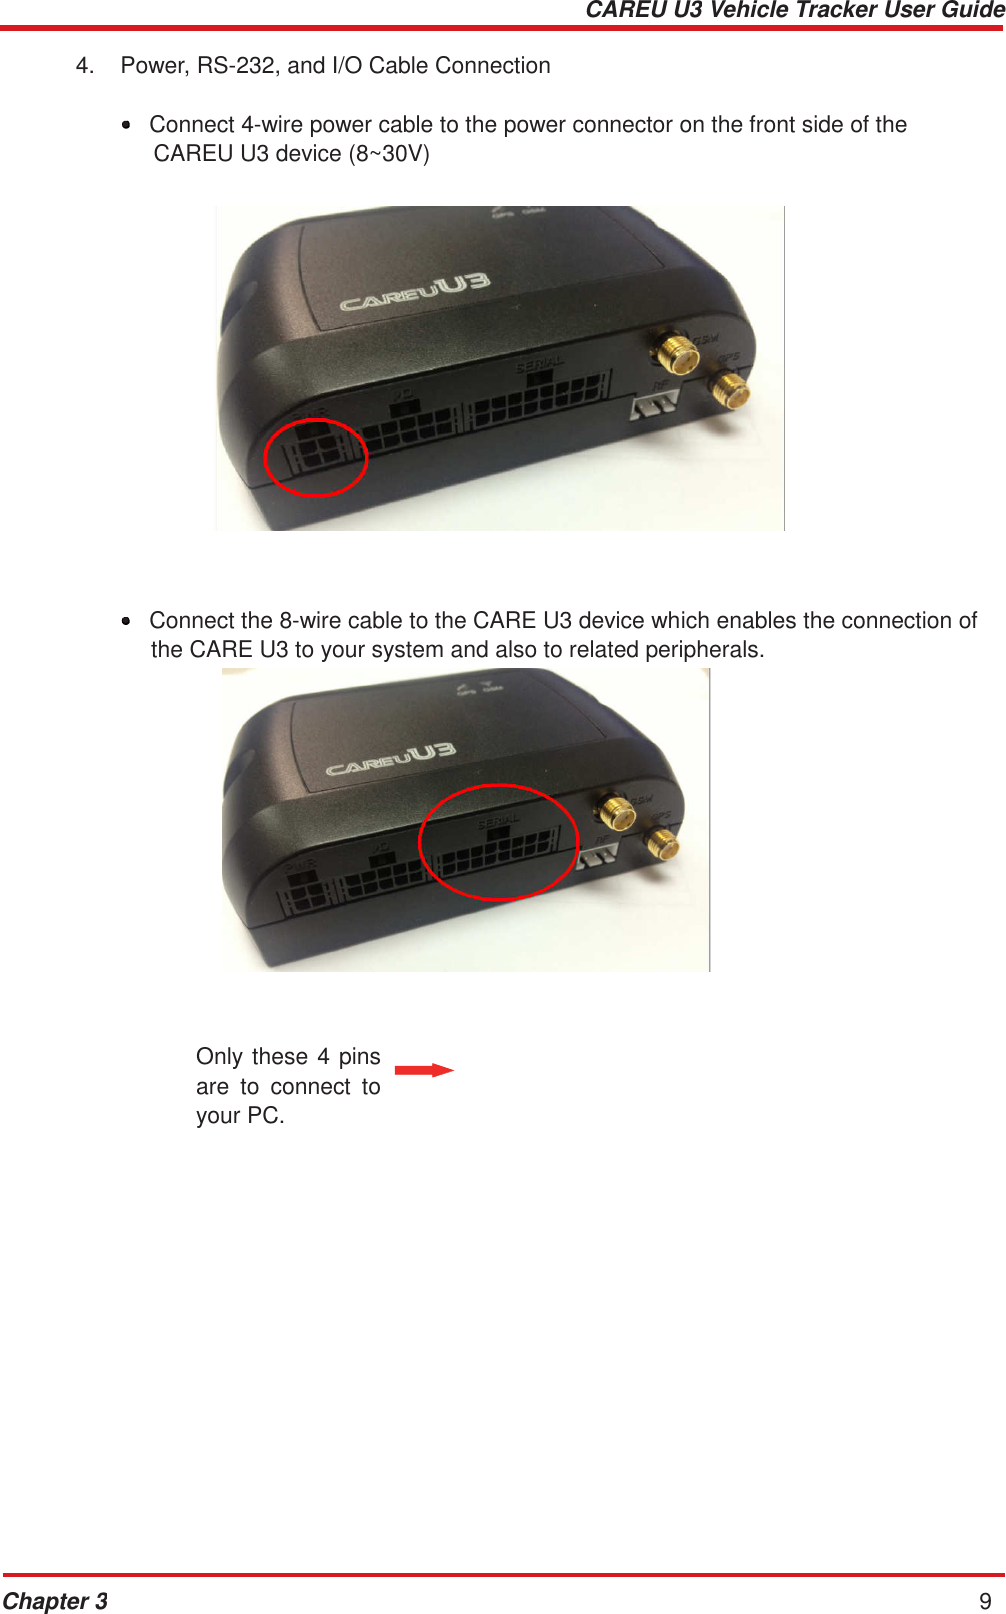 CAREU U3 Vehicle Tracker User Guide Chapter 3 9    4.  Power, RS-232, and I/O Cable Connection   •  Connect 4-wire power cable to the power connector on the front side of the CAREU U3 device (8~30V)                      •  Connect the 8-wire cable to the CARE U3 device which enables the connection of the CARE U3 to your system and also to related peripherals.                   Only these 4 pins are  to  connect  to your PC. 